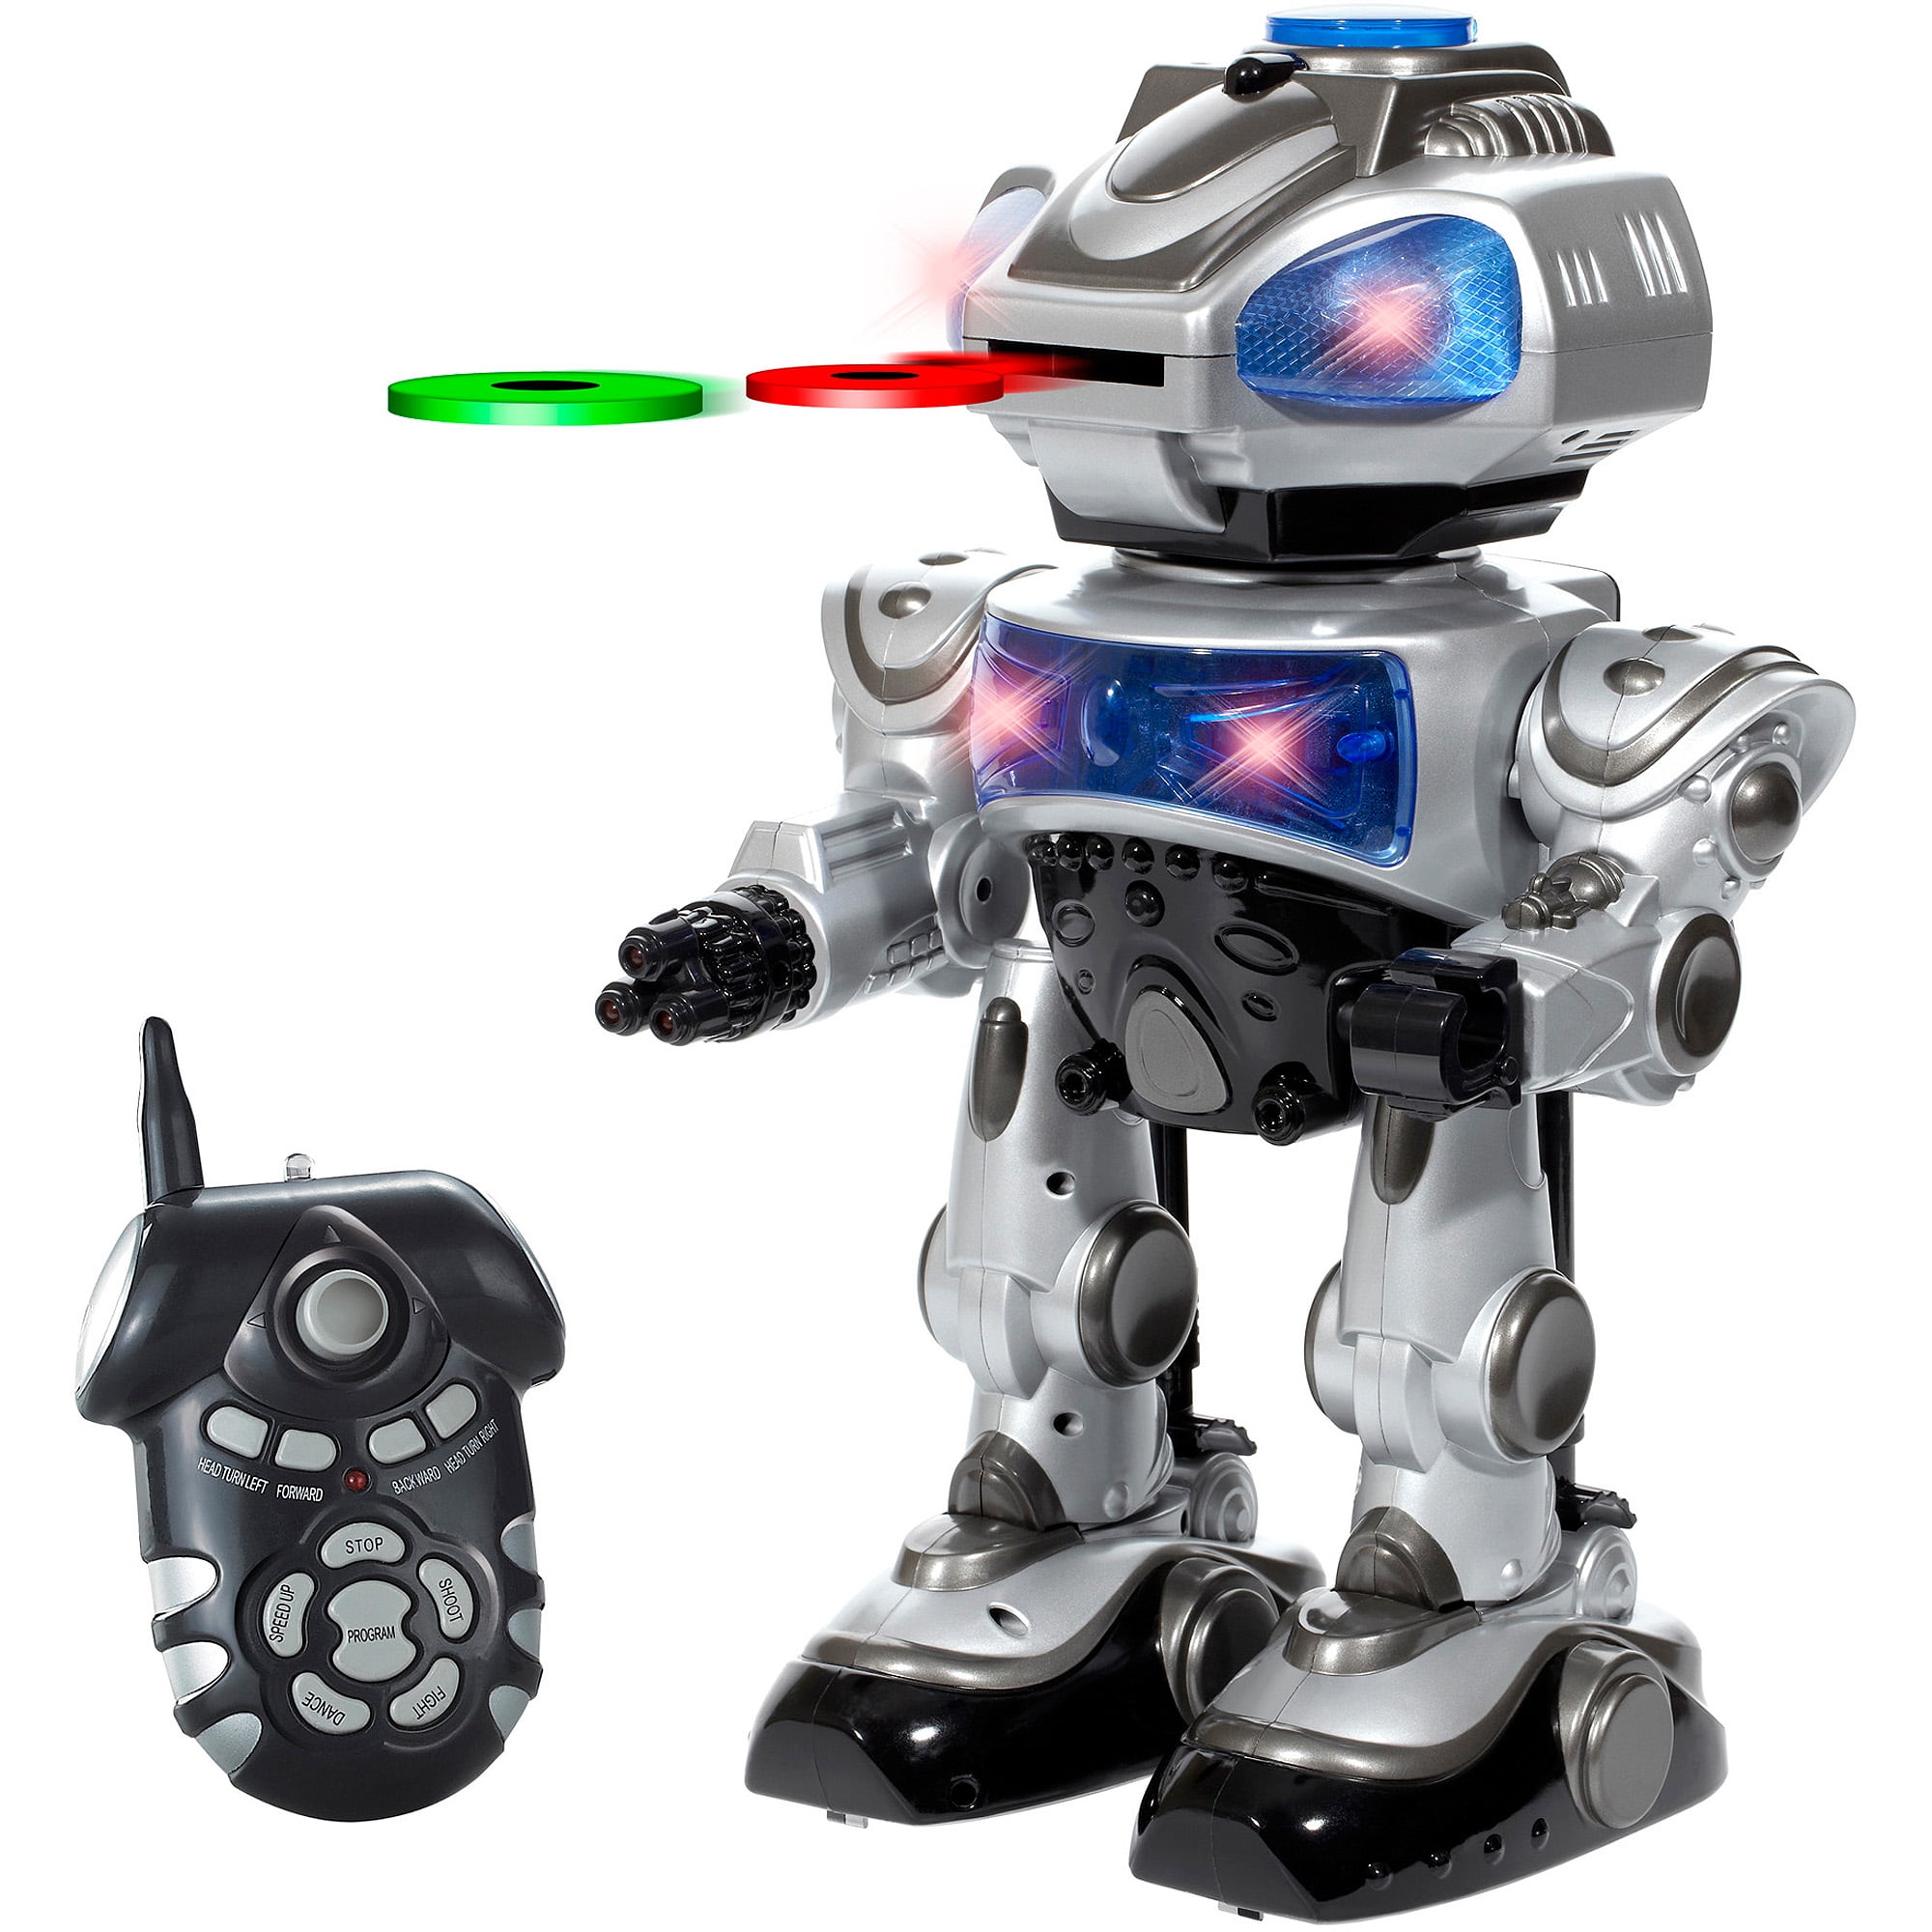 WowWee 0825 MiP Robot Black and Silve for sale online 